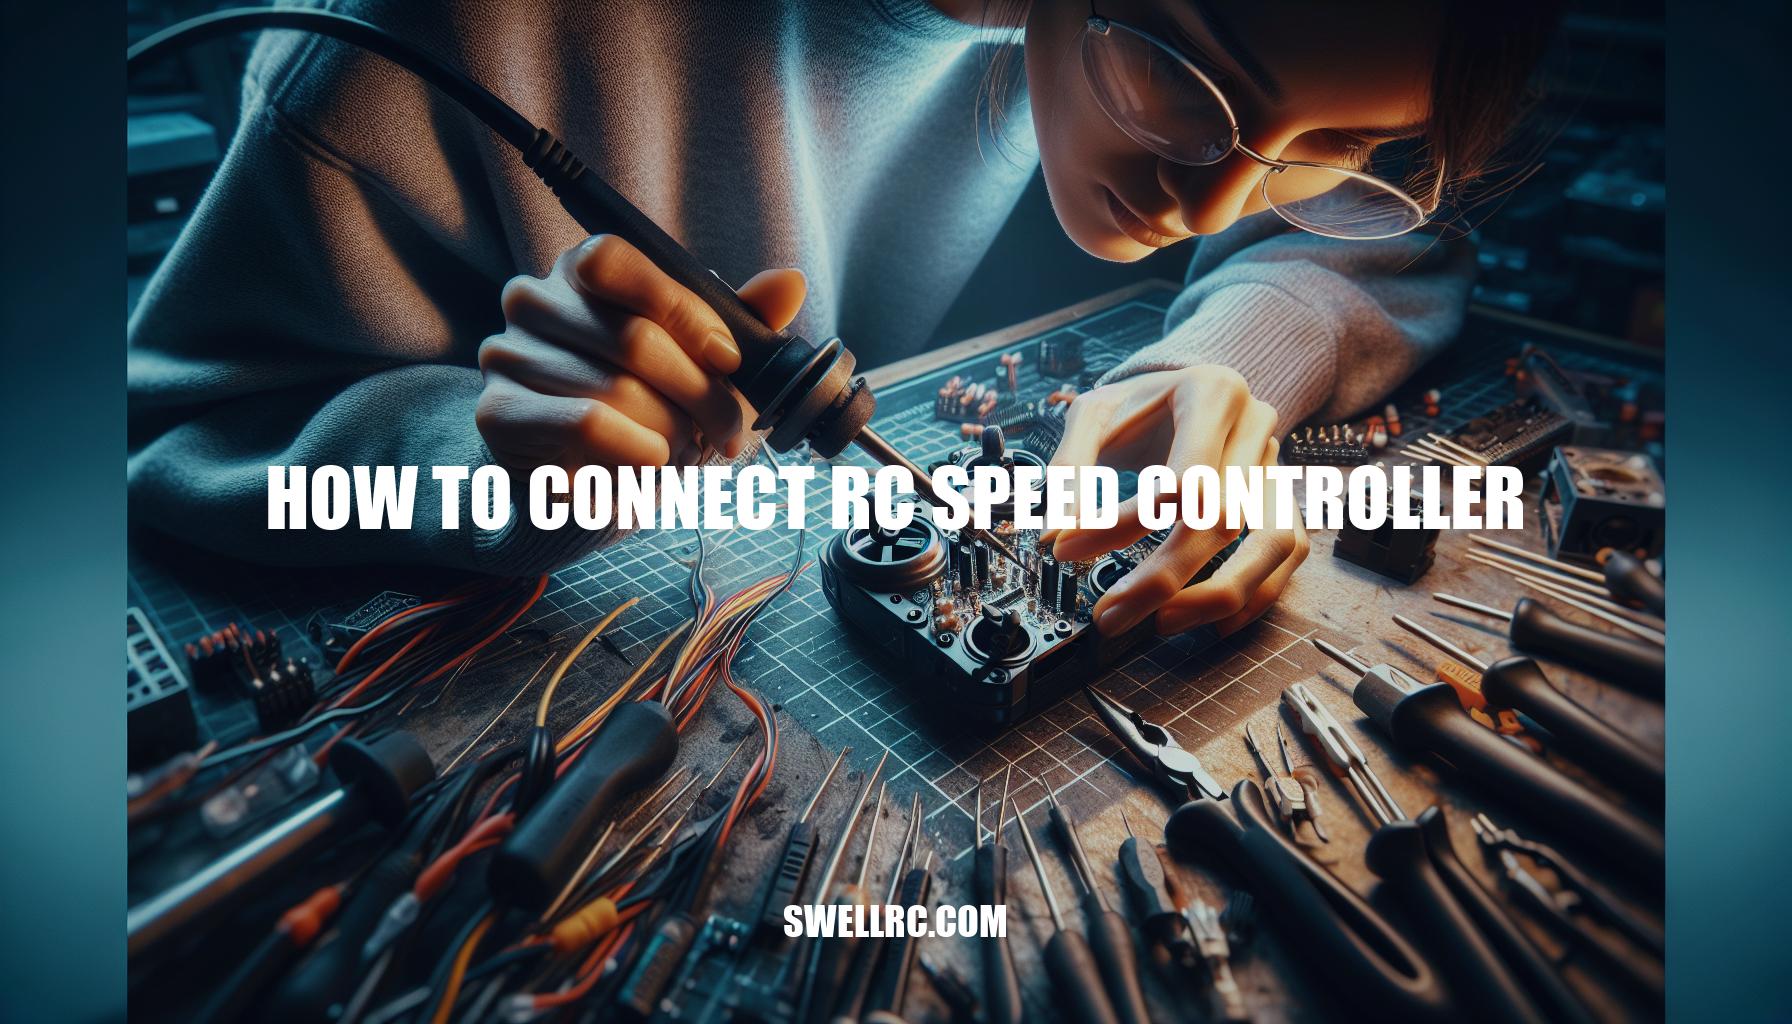 Step-by-Step Guide: How to Connect RC Speed Controller